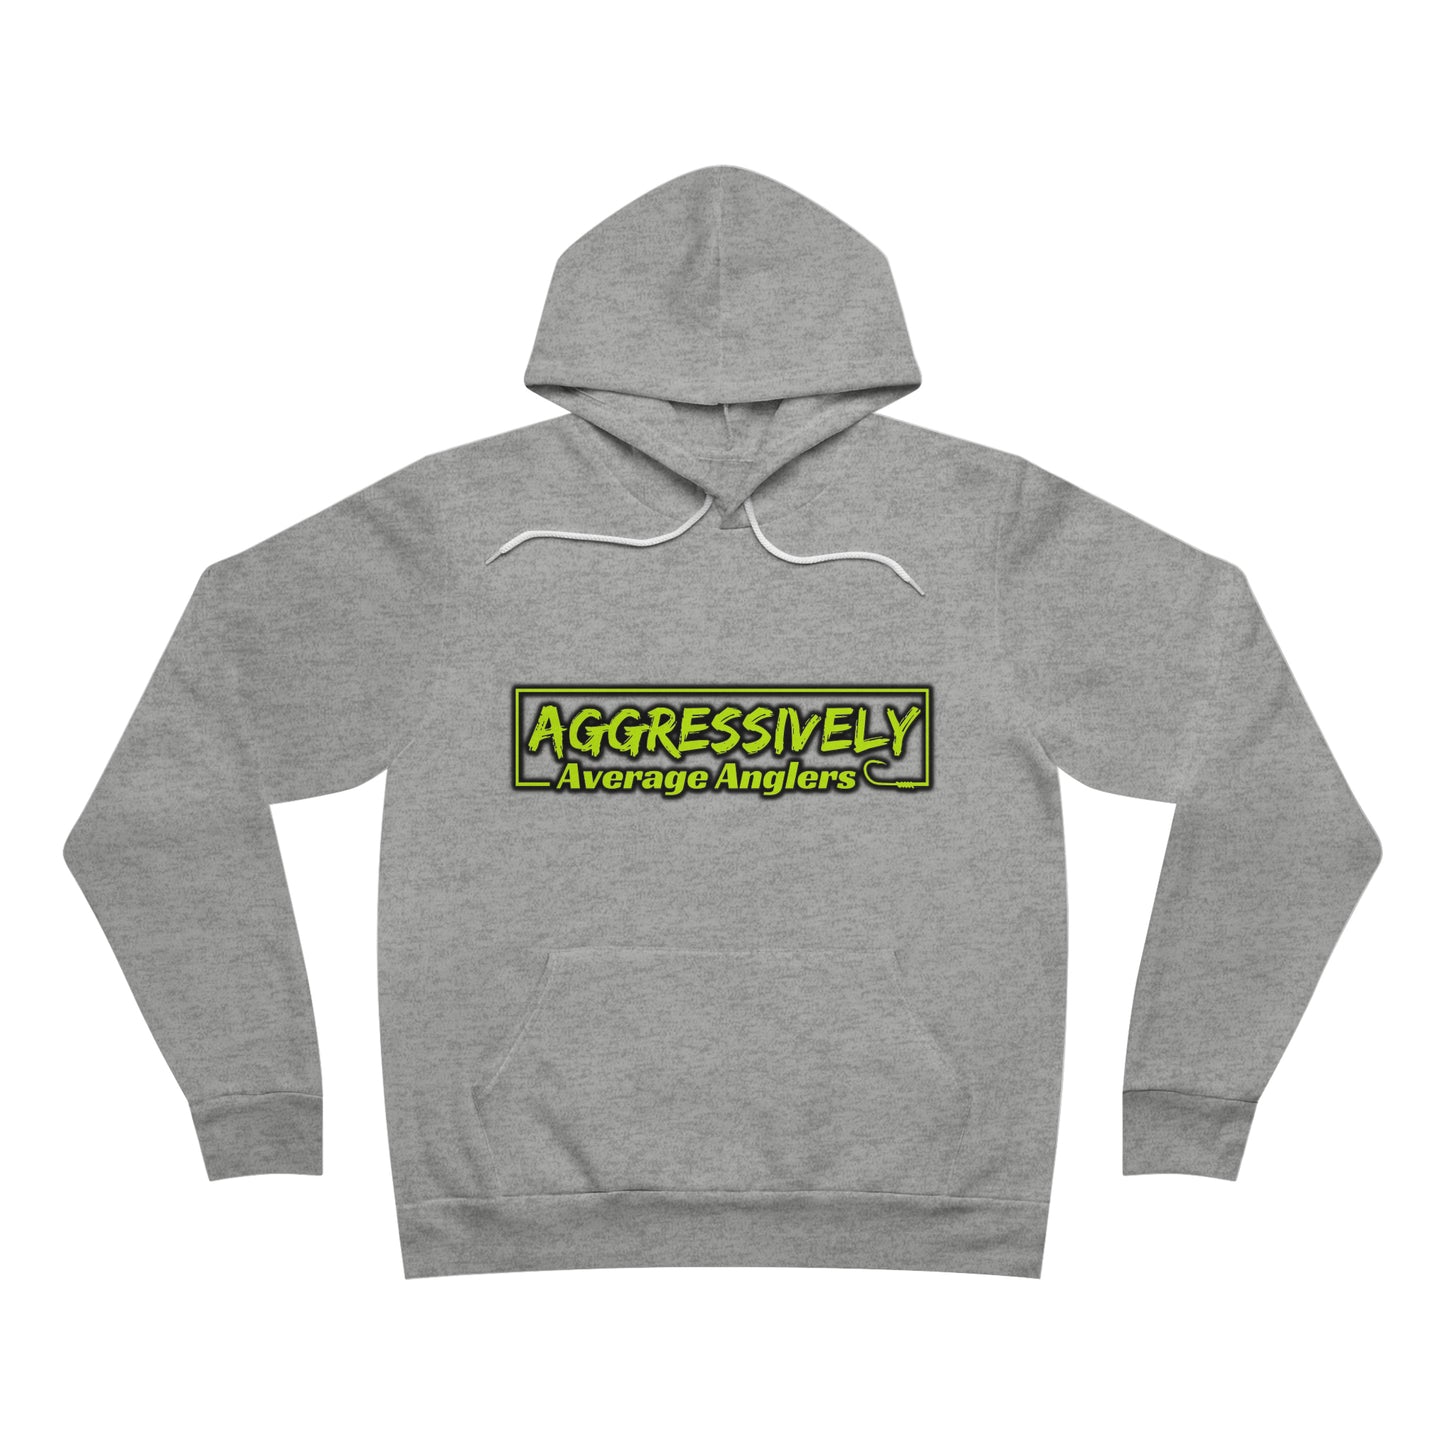 Aggressively Average Anglers Chartreuse Fleece Pullover Hoodie